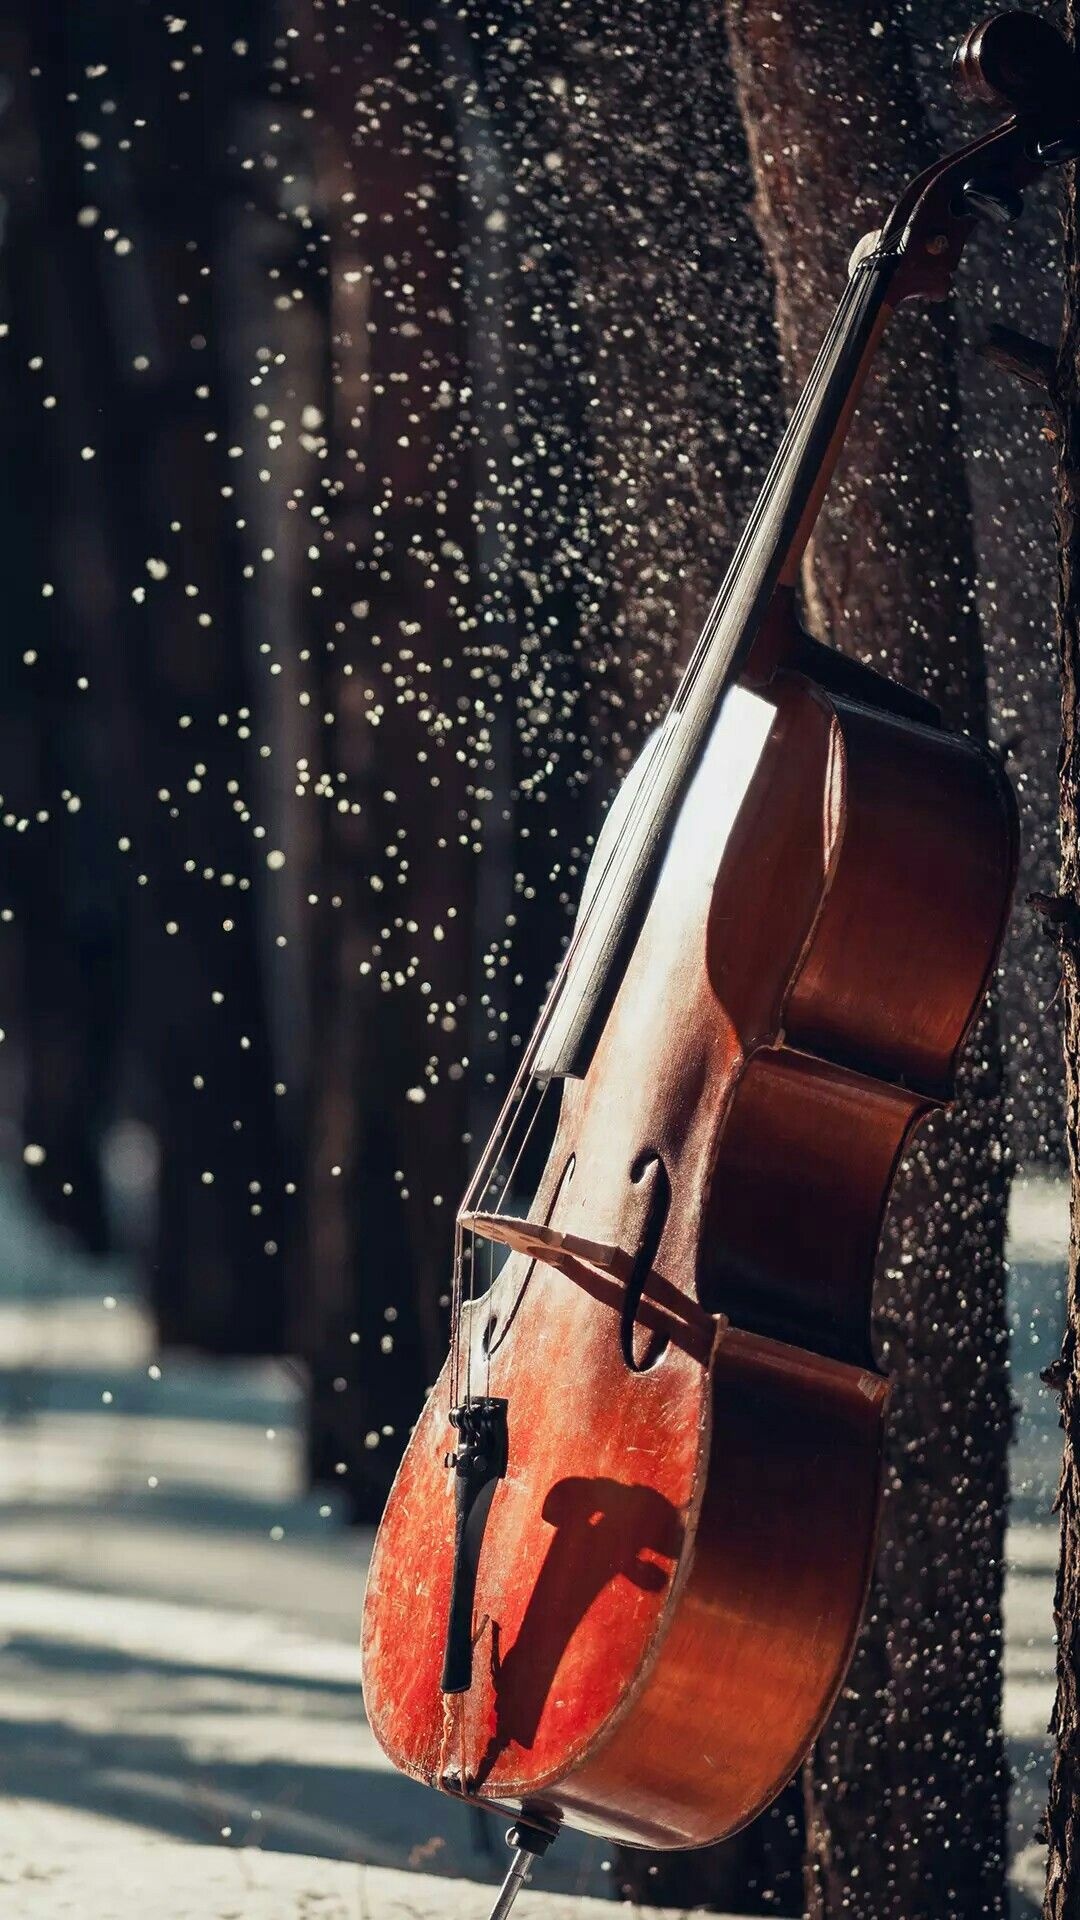 Double Bass: Cello Instrument, A Bowed String Instrument Of The Violin Family. 1080x1920 Full HD Wallpaper.